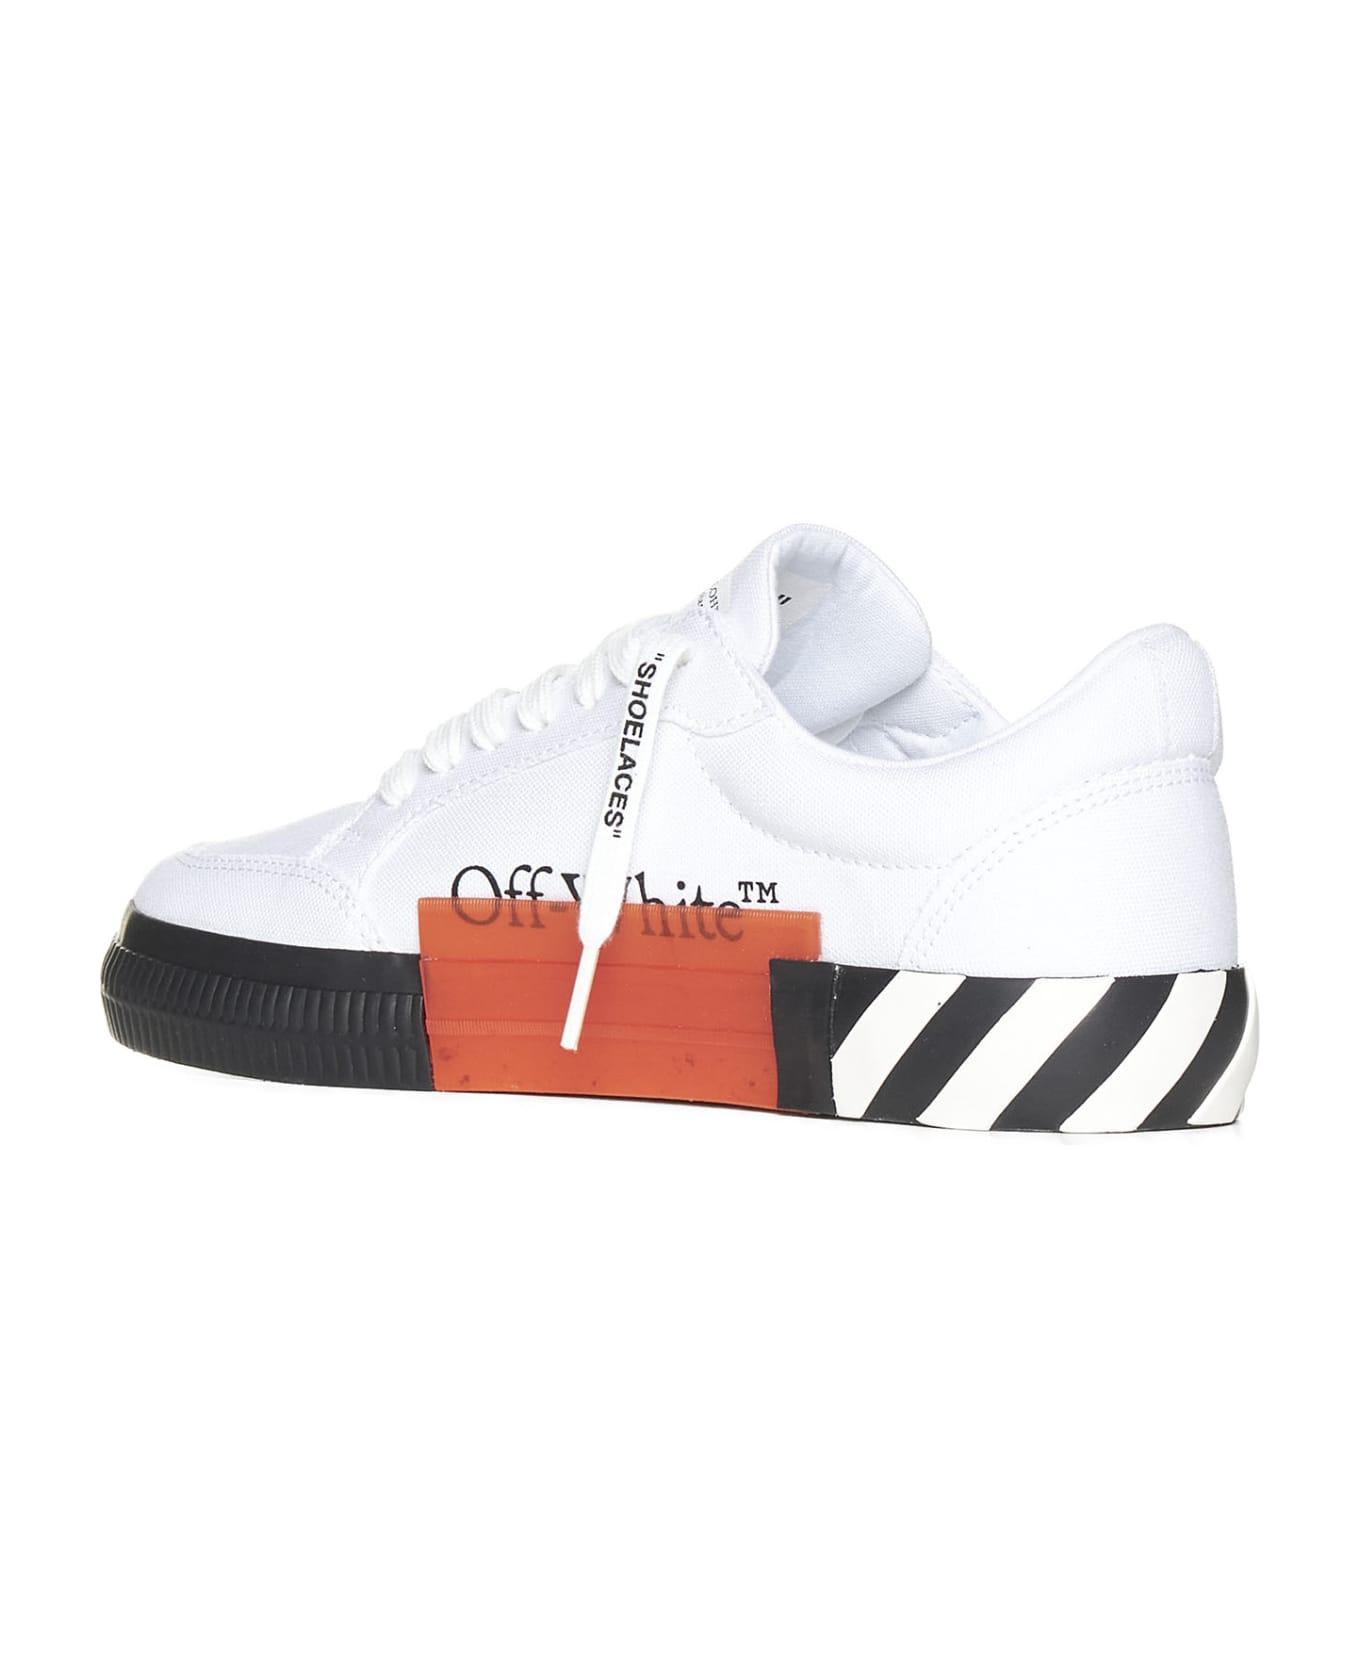 Off-White Low Vulcanized Canvas Sneakers - White Black